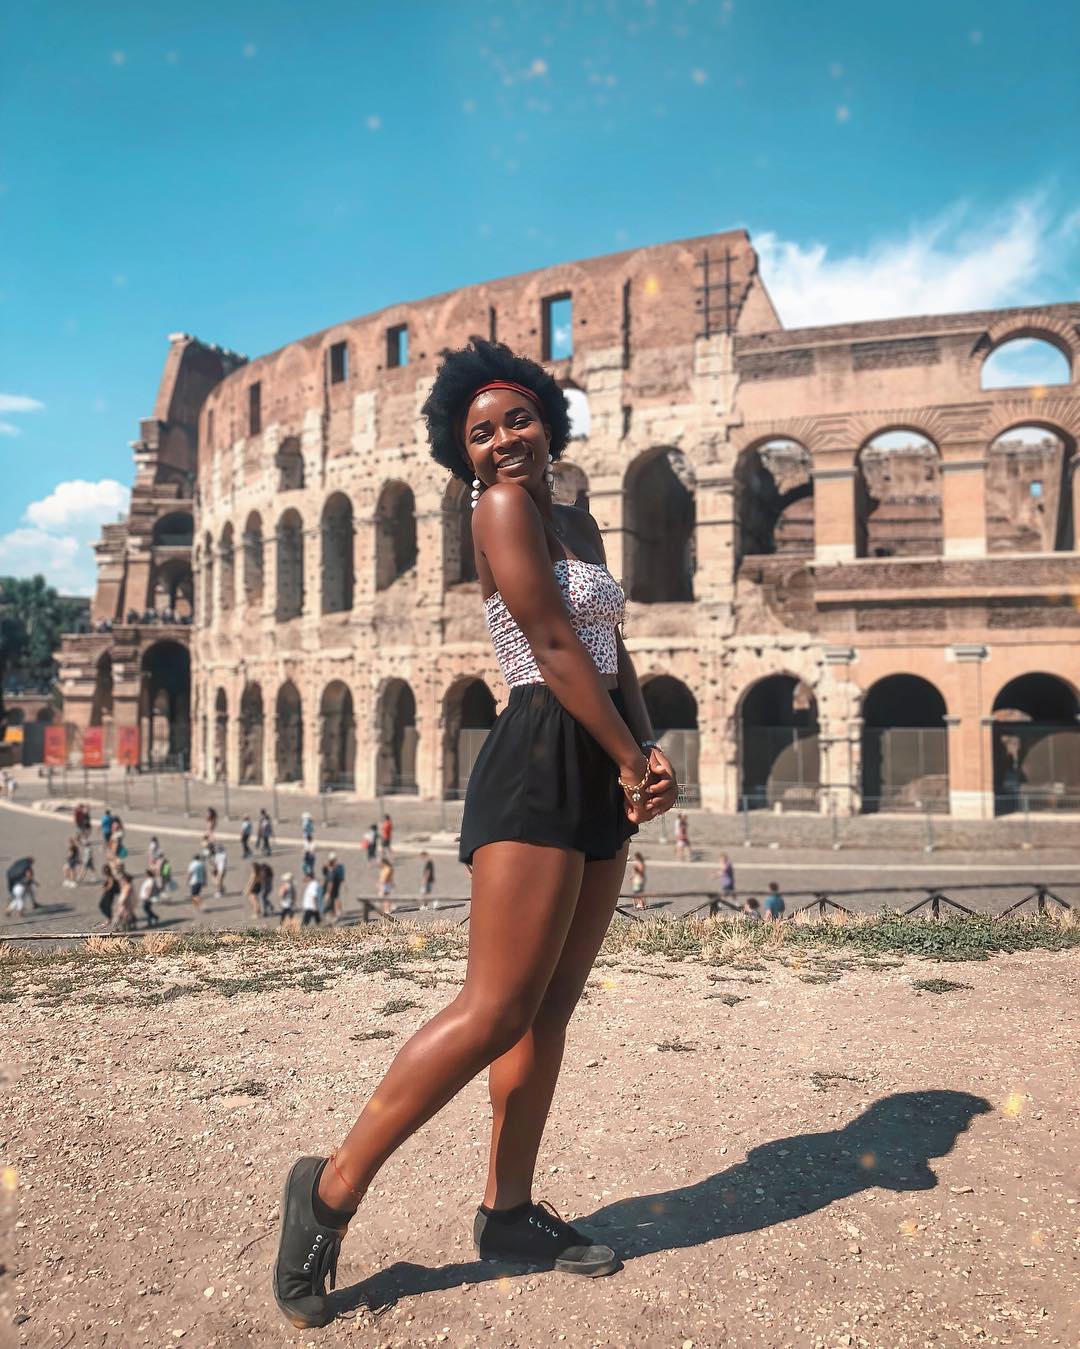 College Student on a Study Abroad Trip in Front of the Colisseum. Photo by Instagram user @nikkipaige1396